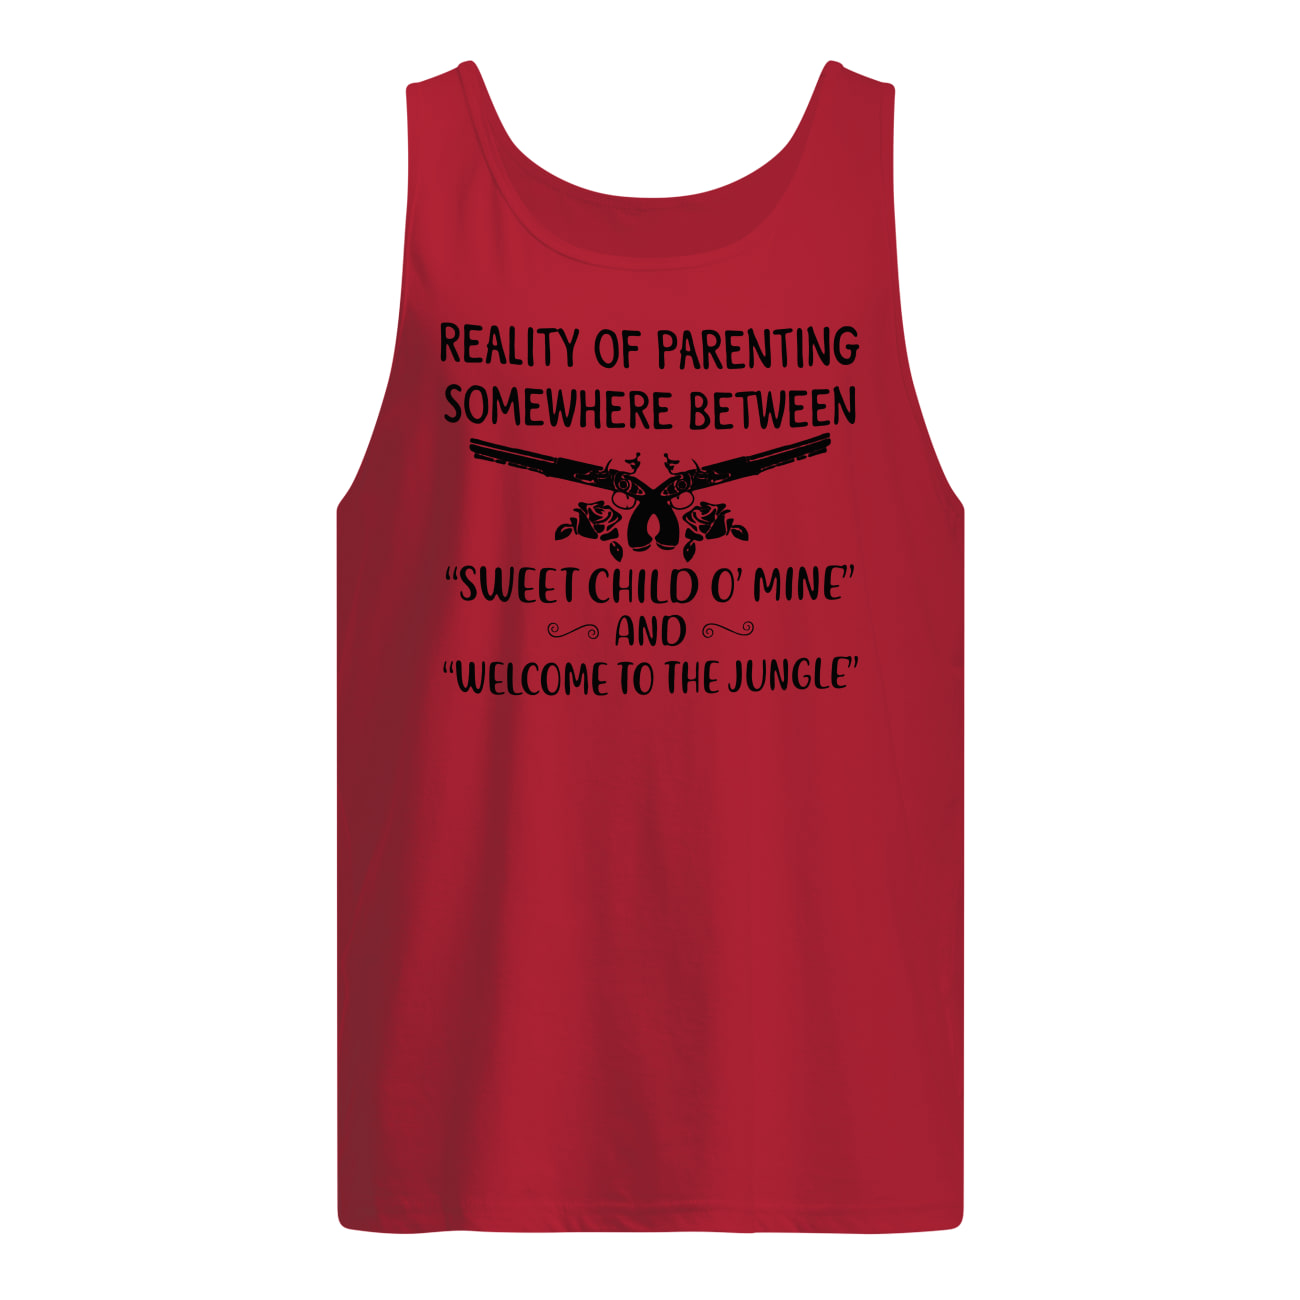 Reality of parenting somewhere between sweet child o' mine and welcome to the jungle tank top